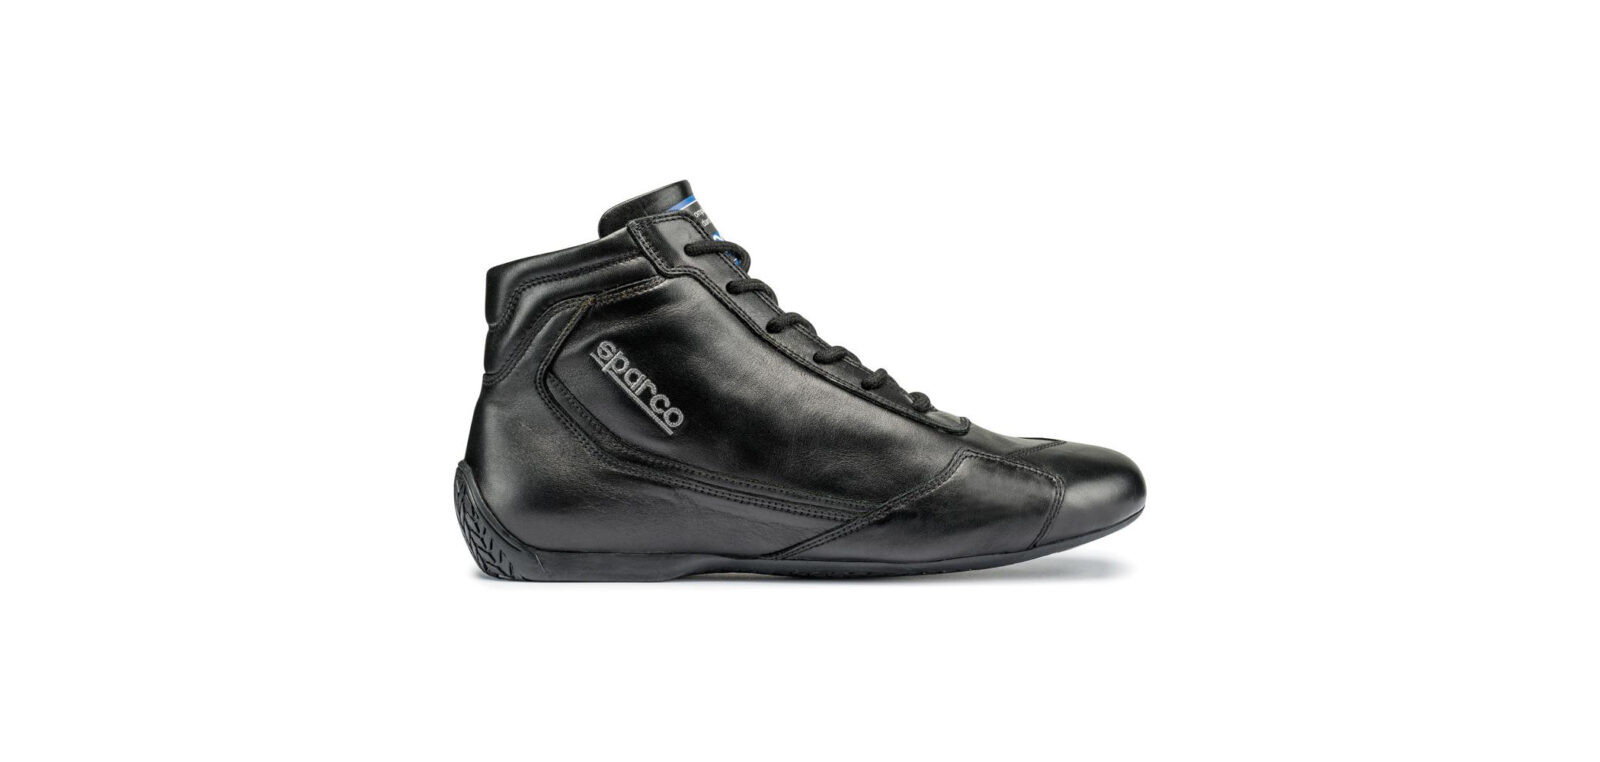 Sparco Slalom RB-3 Classic Racing Boots